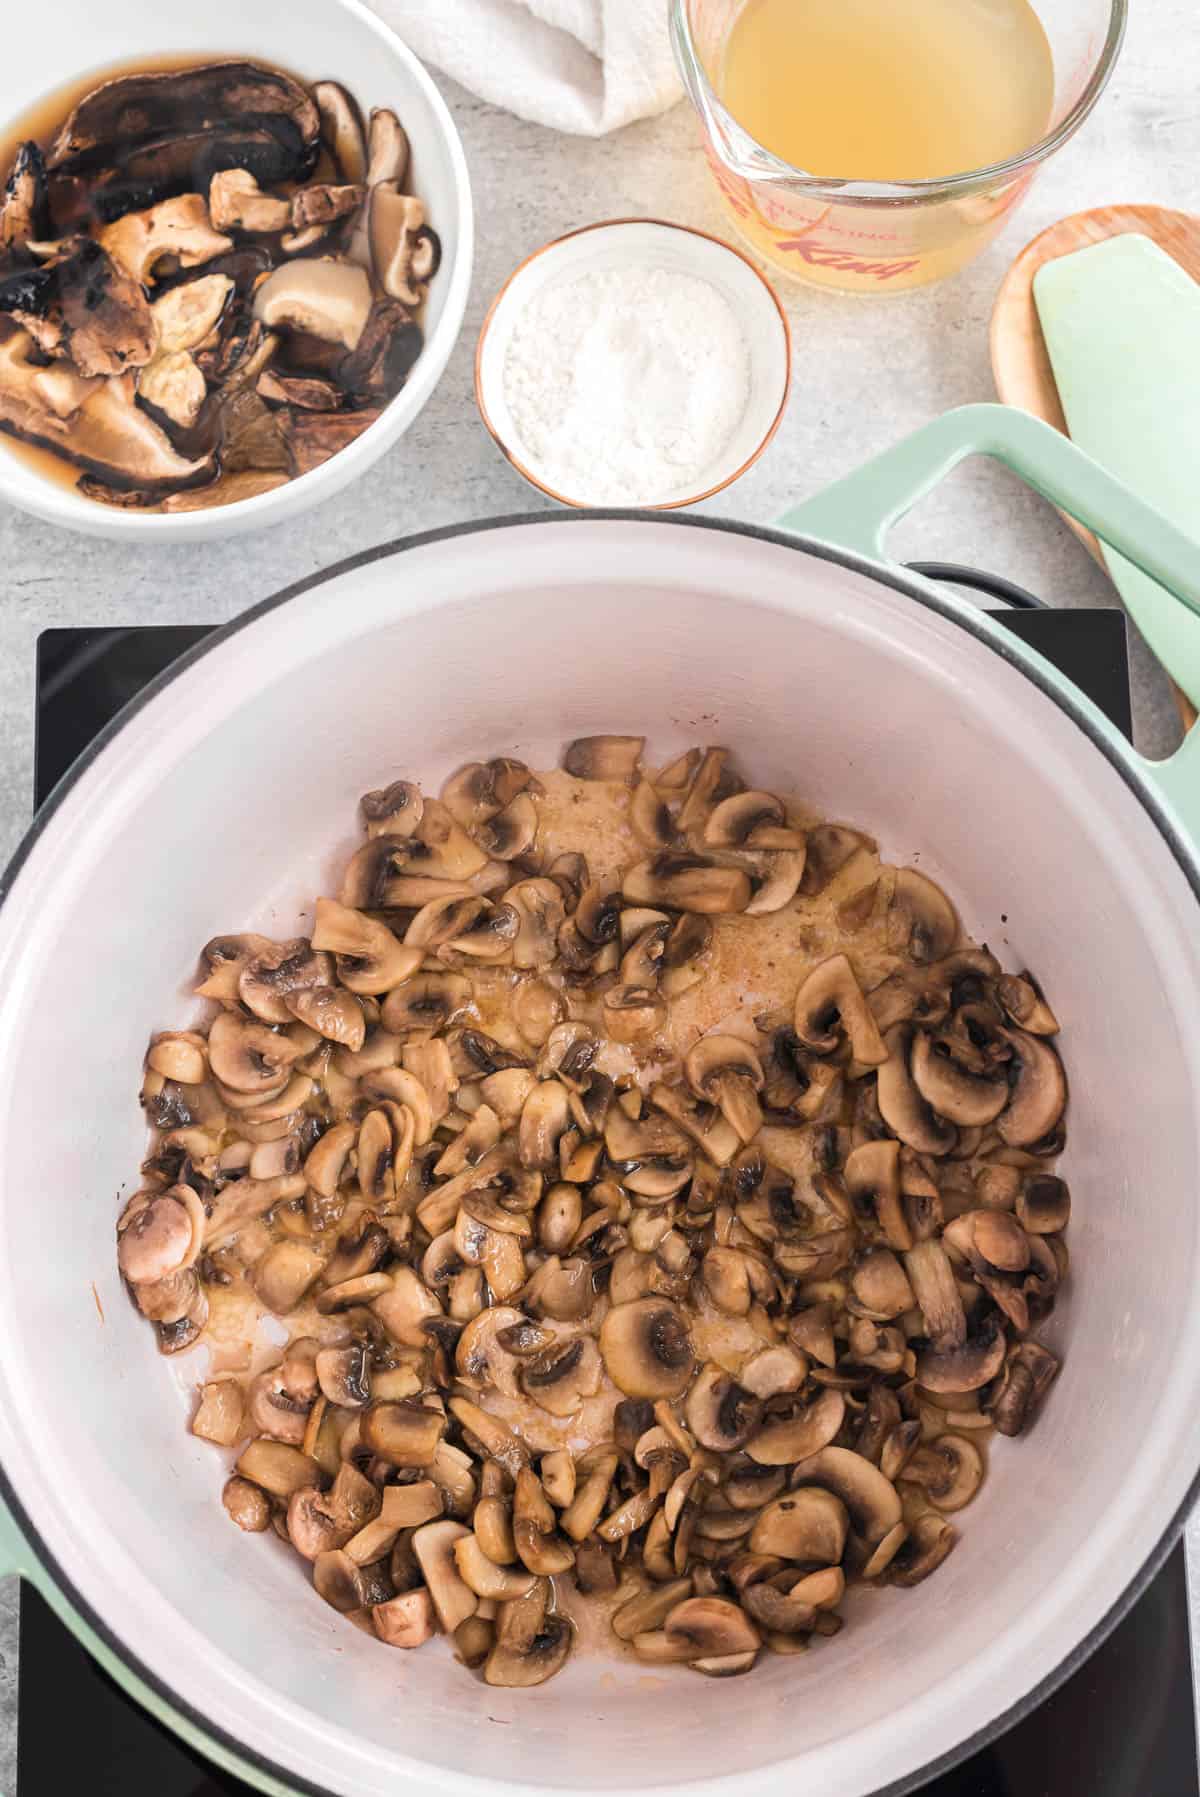 sauteed mushrooms in butter.